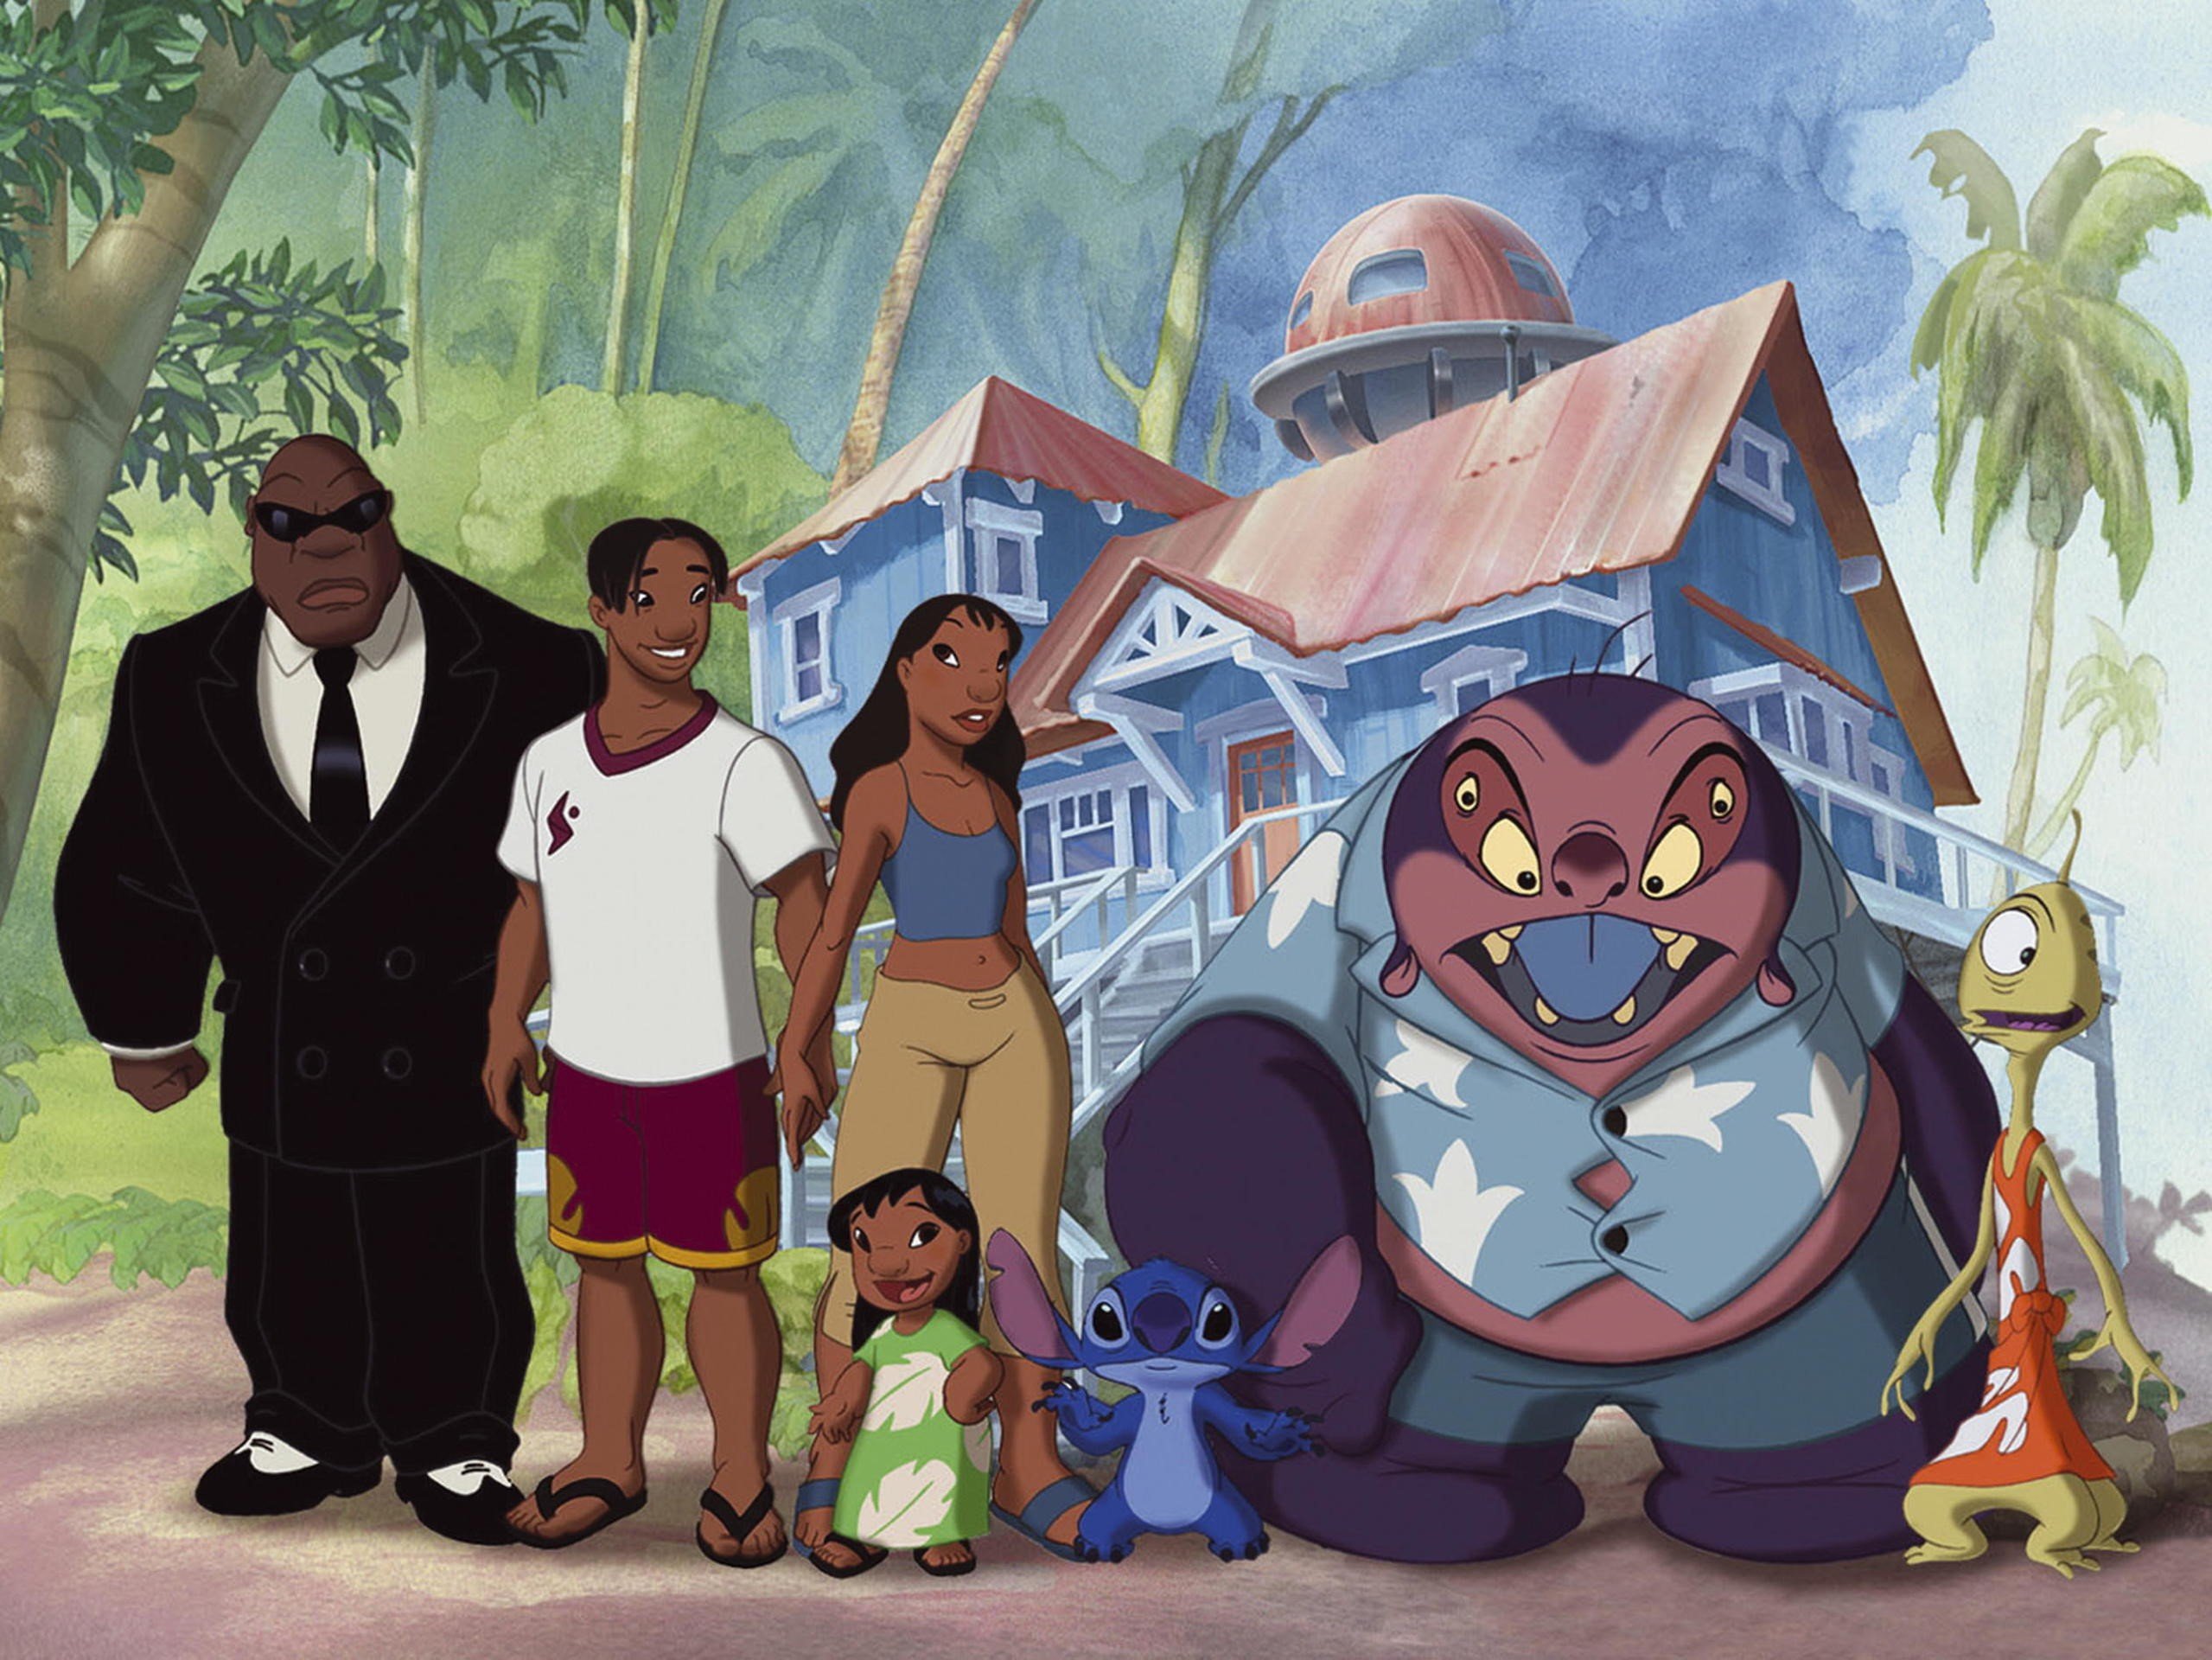 Wallpaper Characters of Lilo and Stitch. 